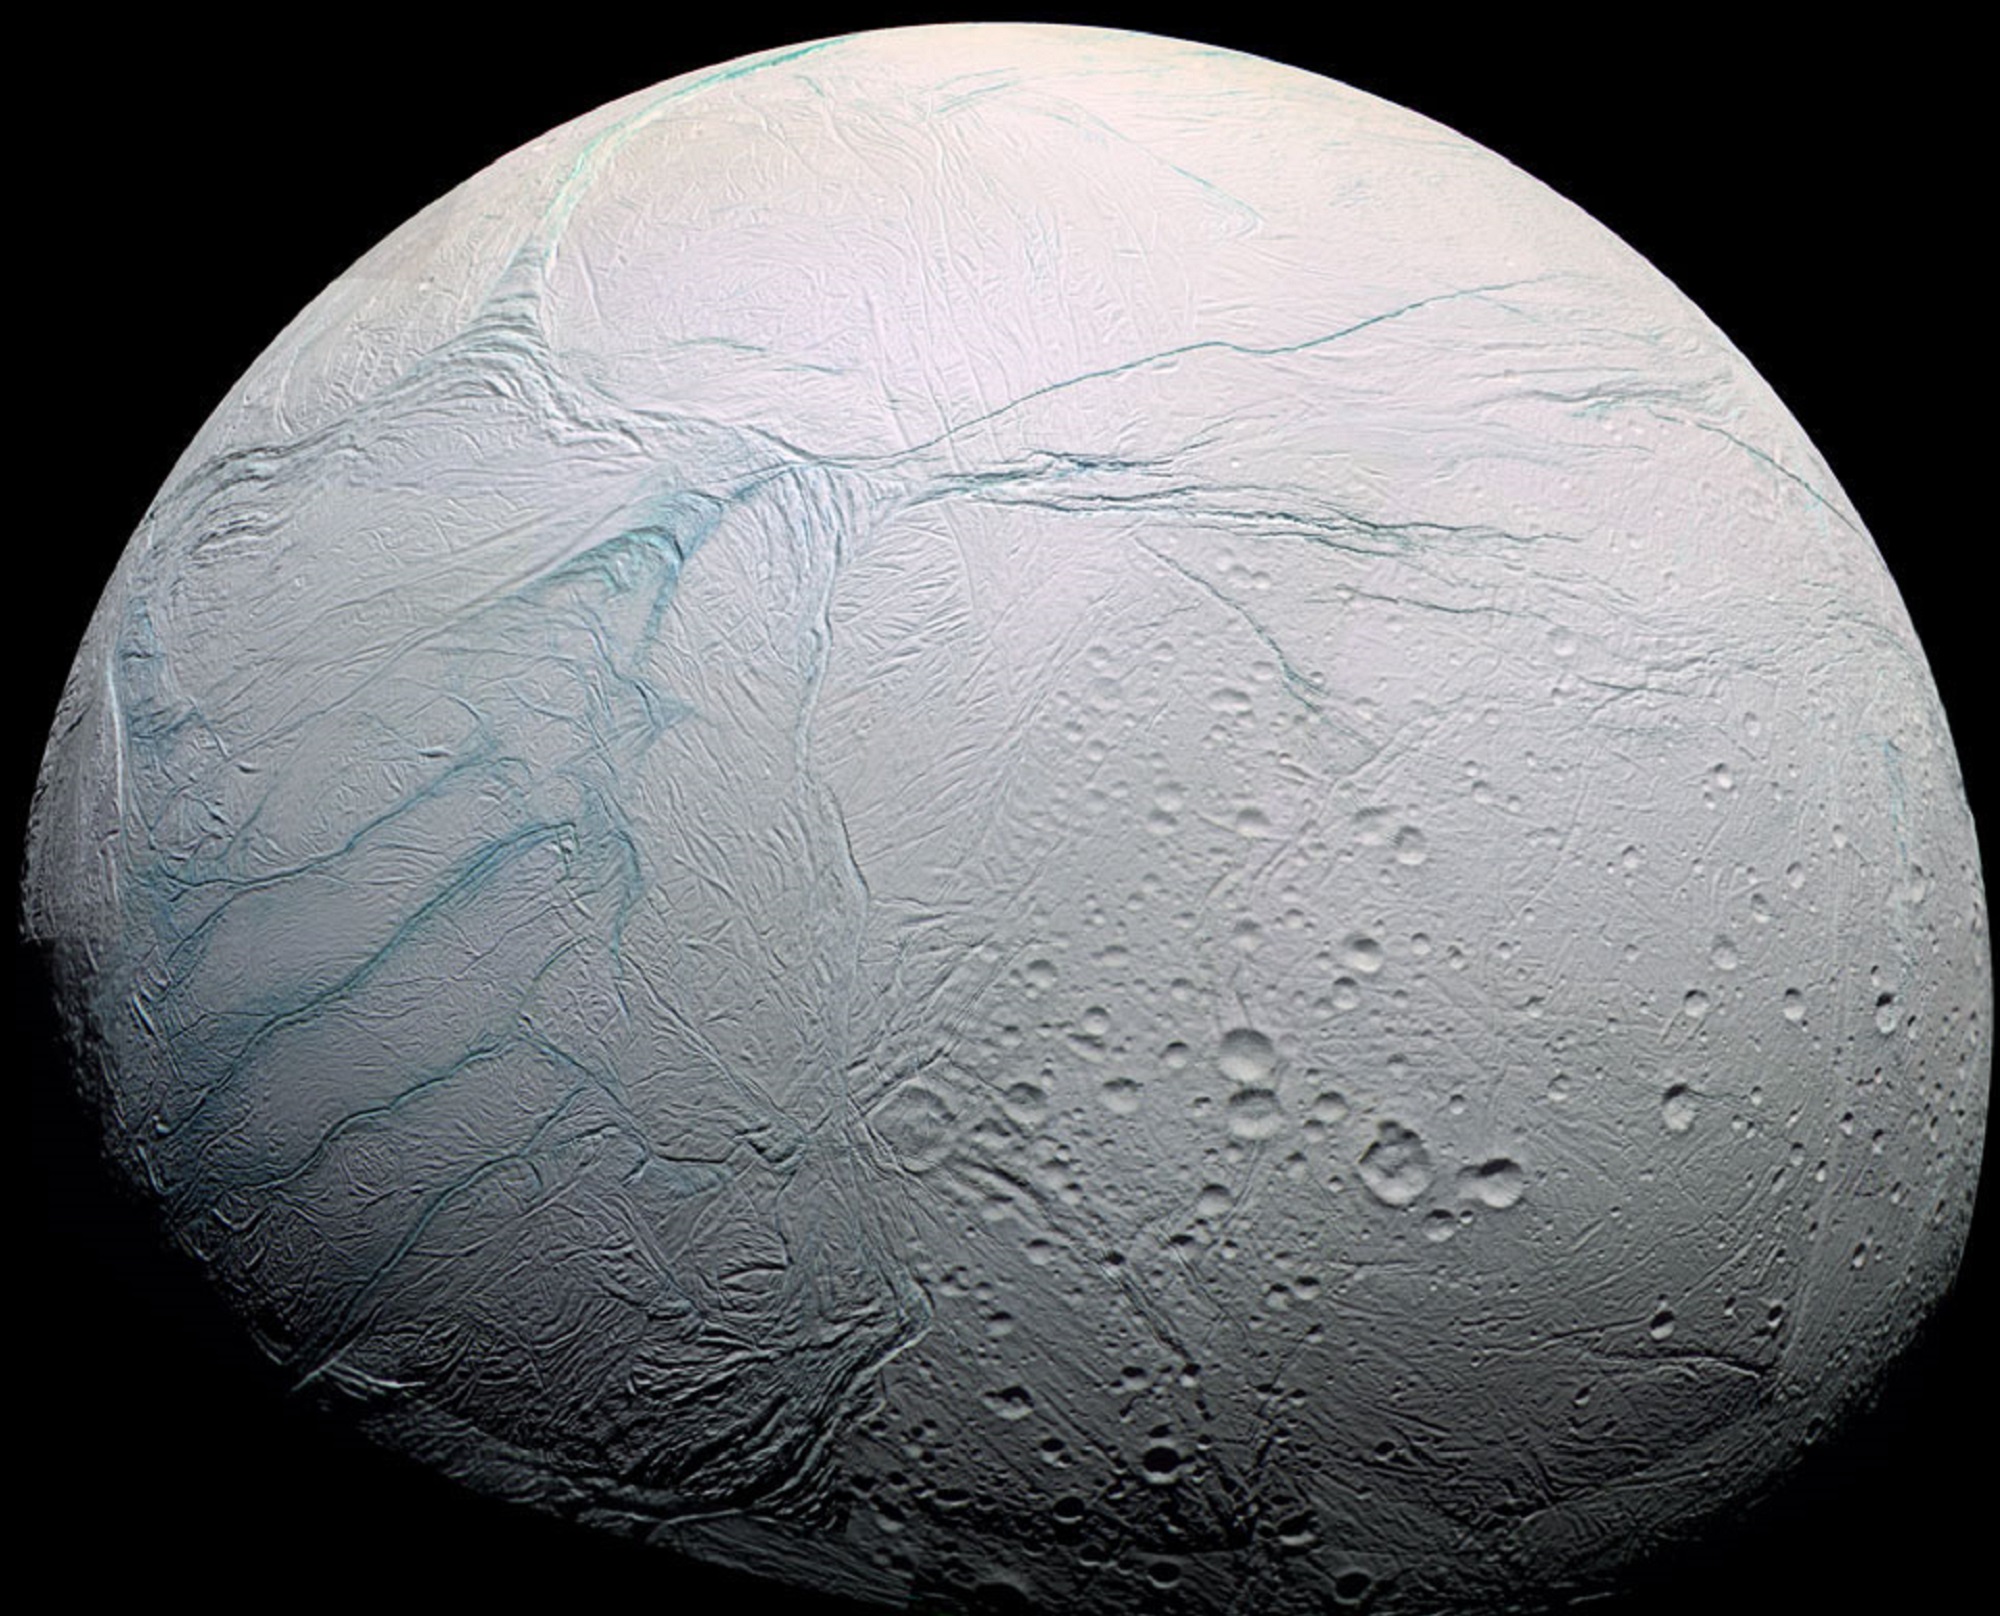 Saturn's ocean moon Enceladus with clear tiger stripes in a blue colorized image from the Cassini space probe